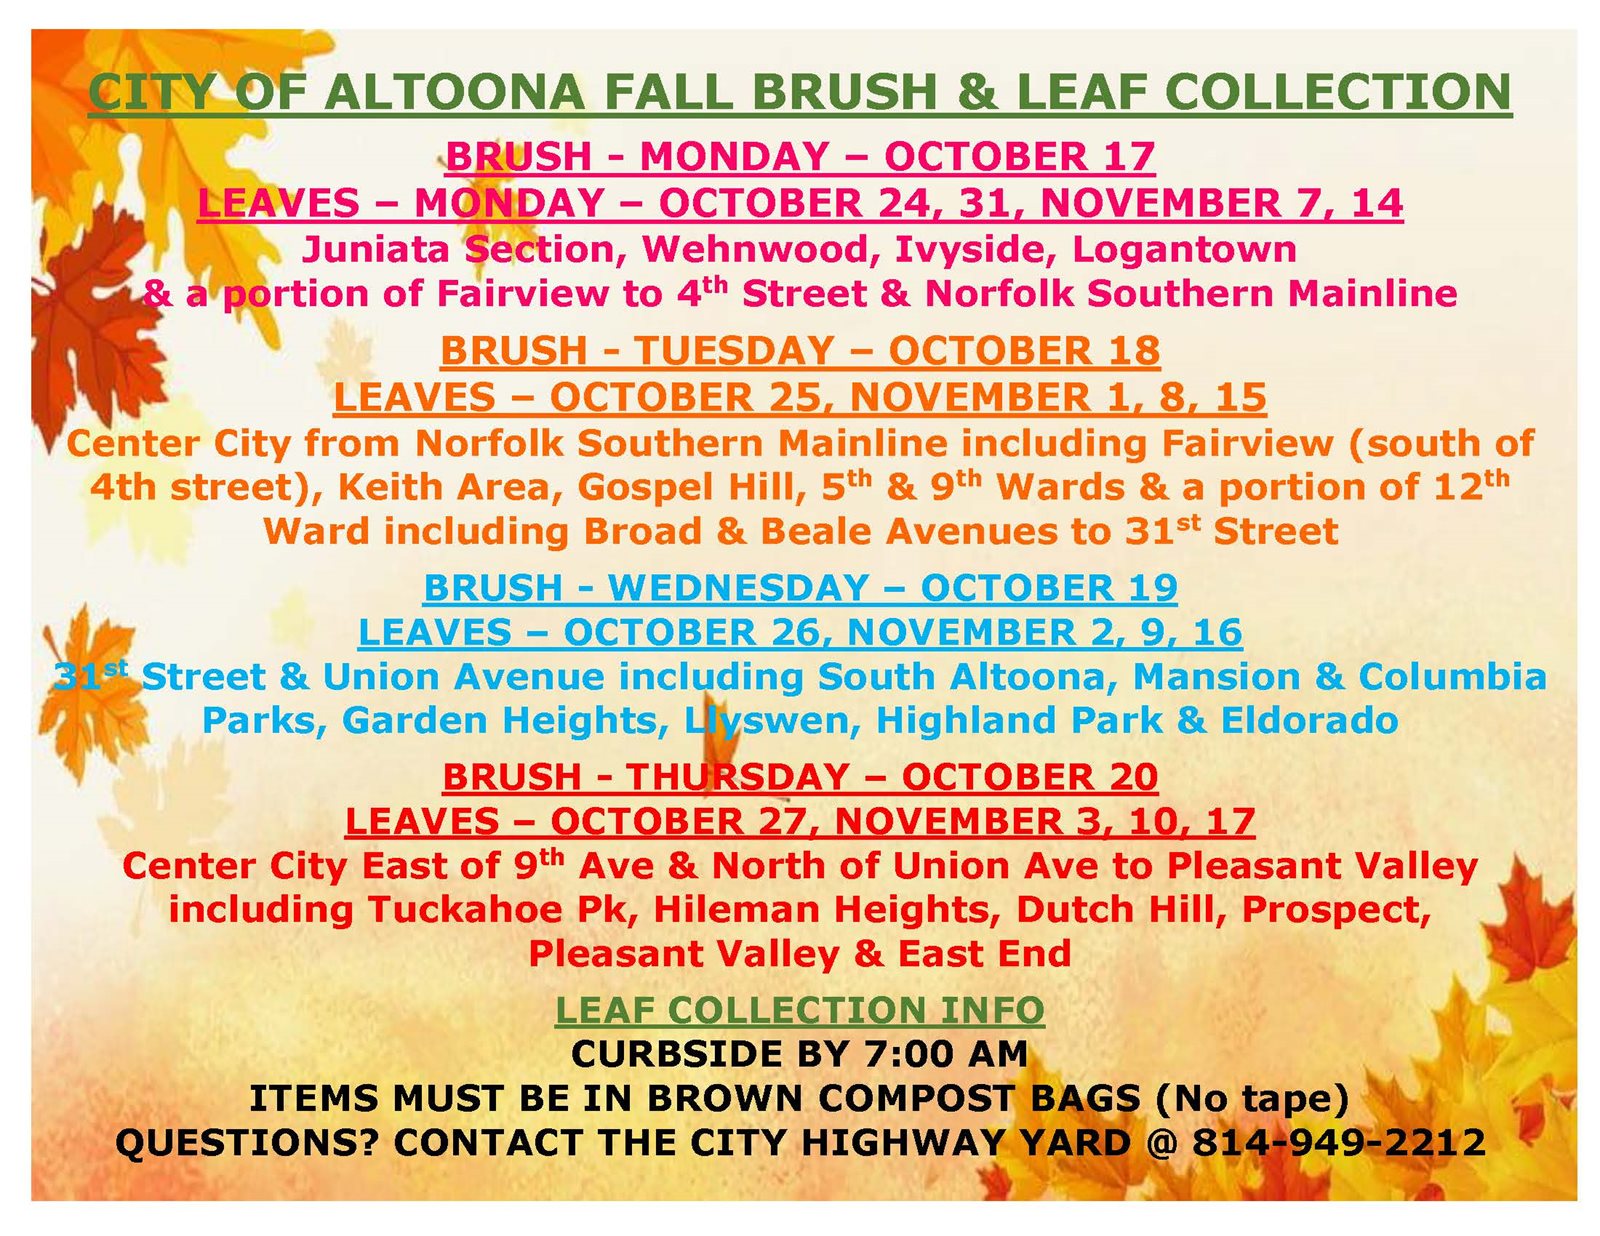 Fall Brush & Leaf Collection